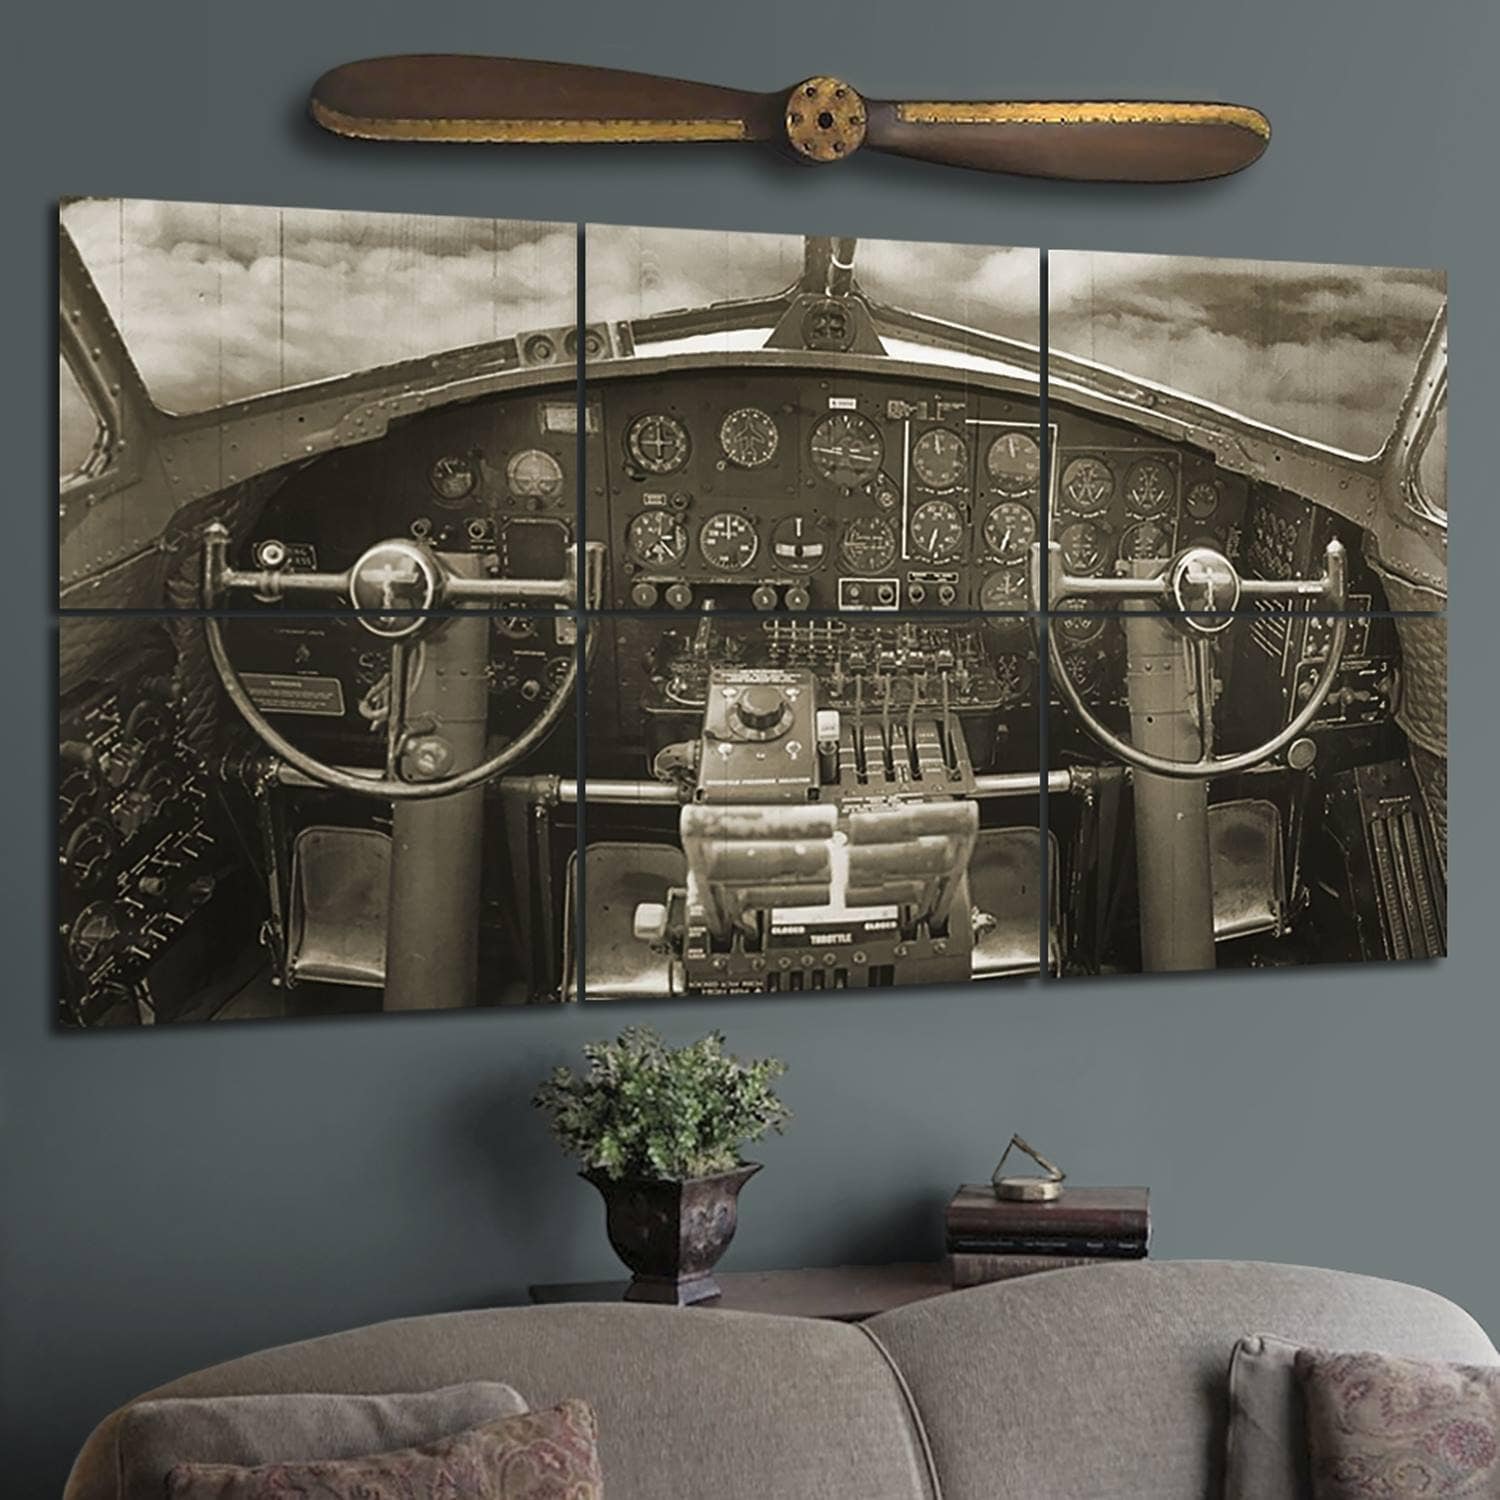 Chic Wall Hanging Mural for Flight Enthusiasts